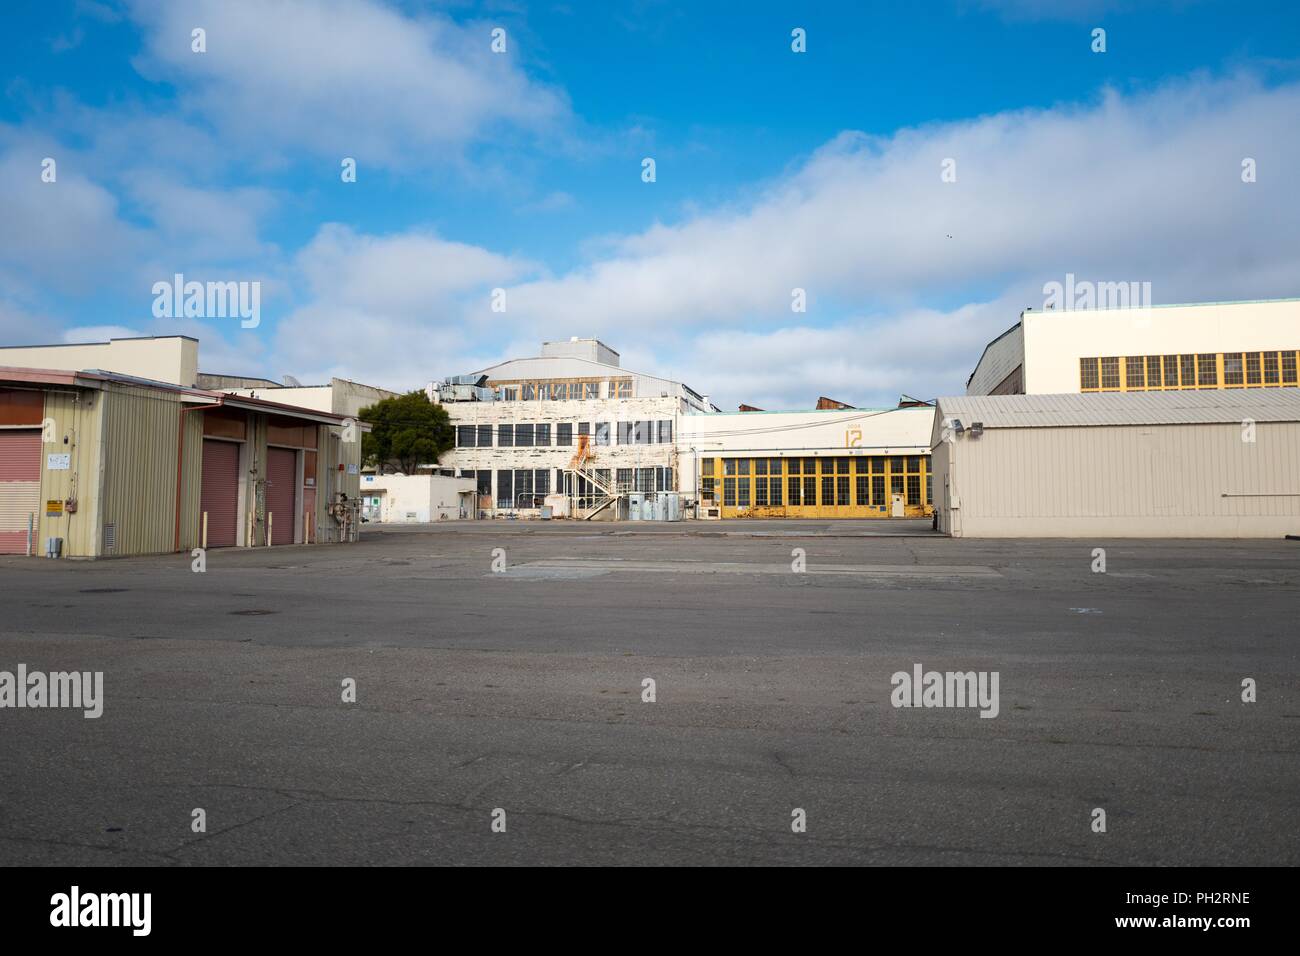 Hangar buildings are visible across a large stretch of tarmac at the defunct Alameda Naval Air Station (NAS), a former US Navy base on Alameda Island, Alameda, California, August 13, 2018. () Stock Photo